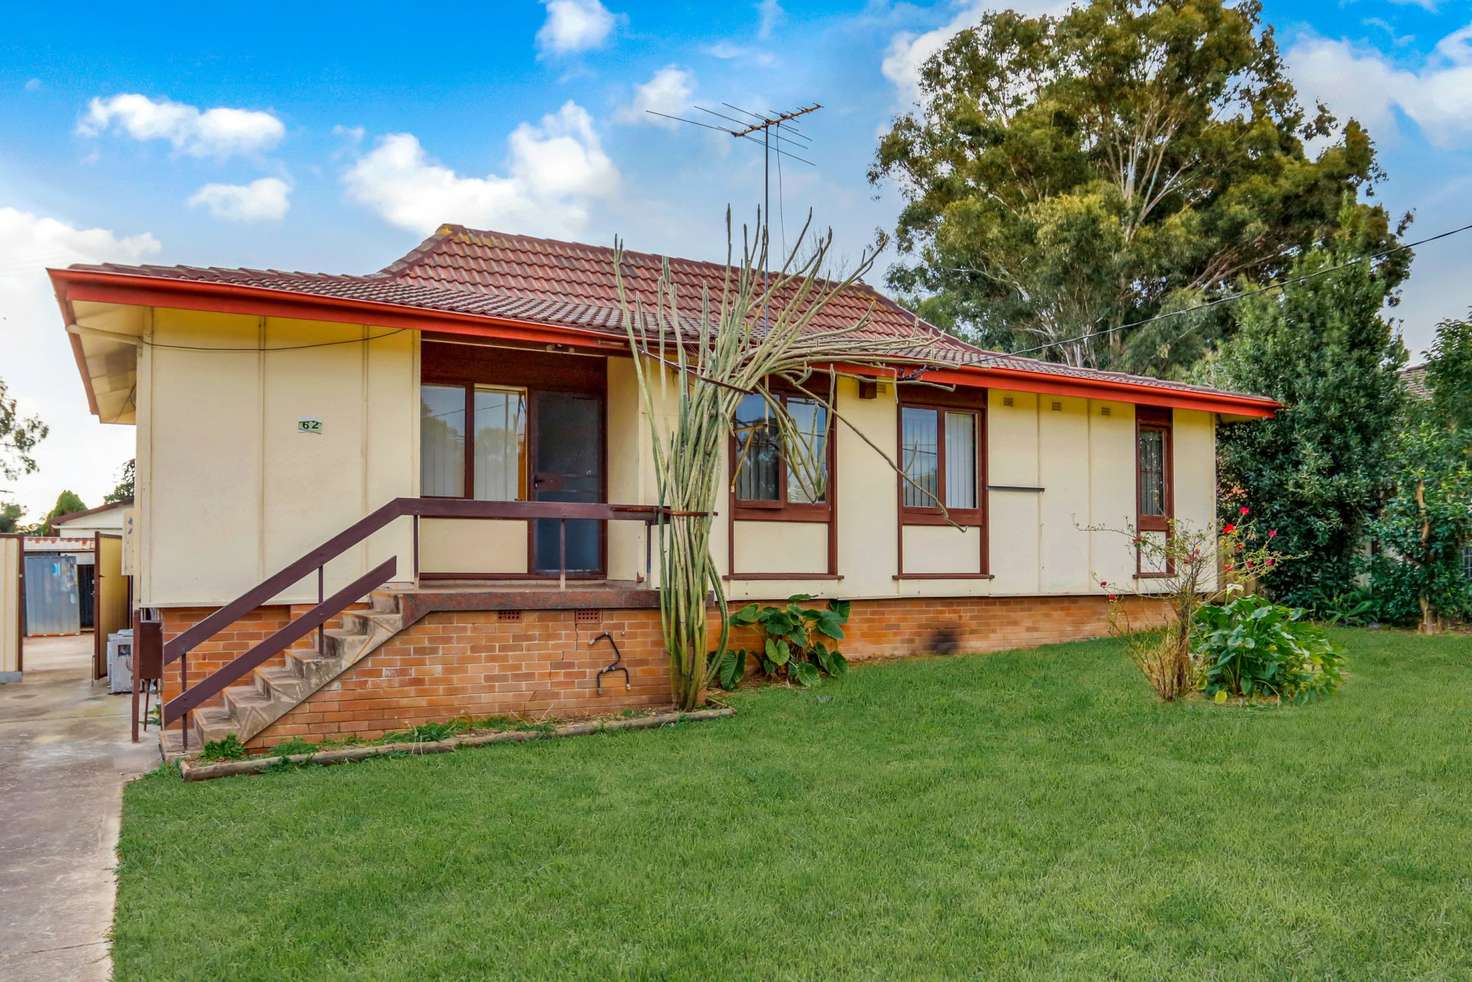 Main view of Homely house listing, 62 Torres Cresent, Whalan NSW 2770